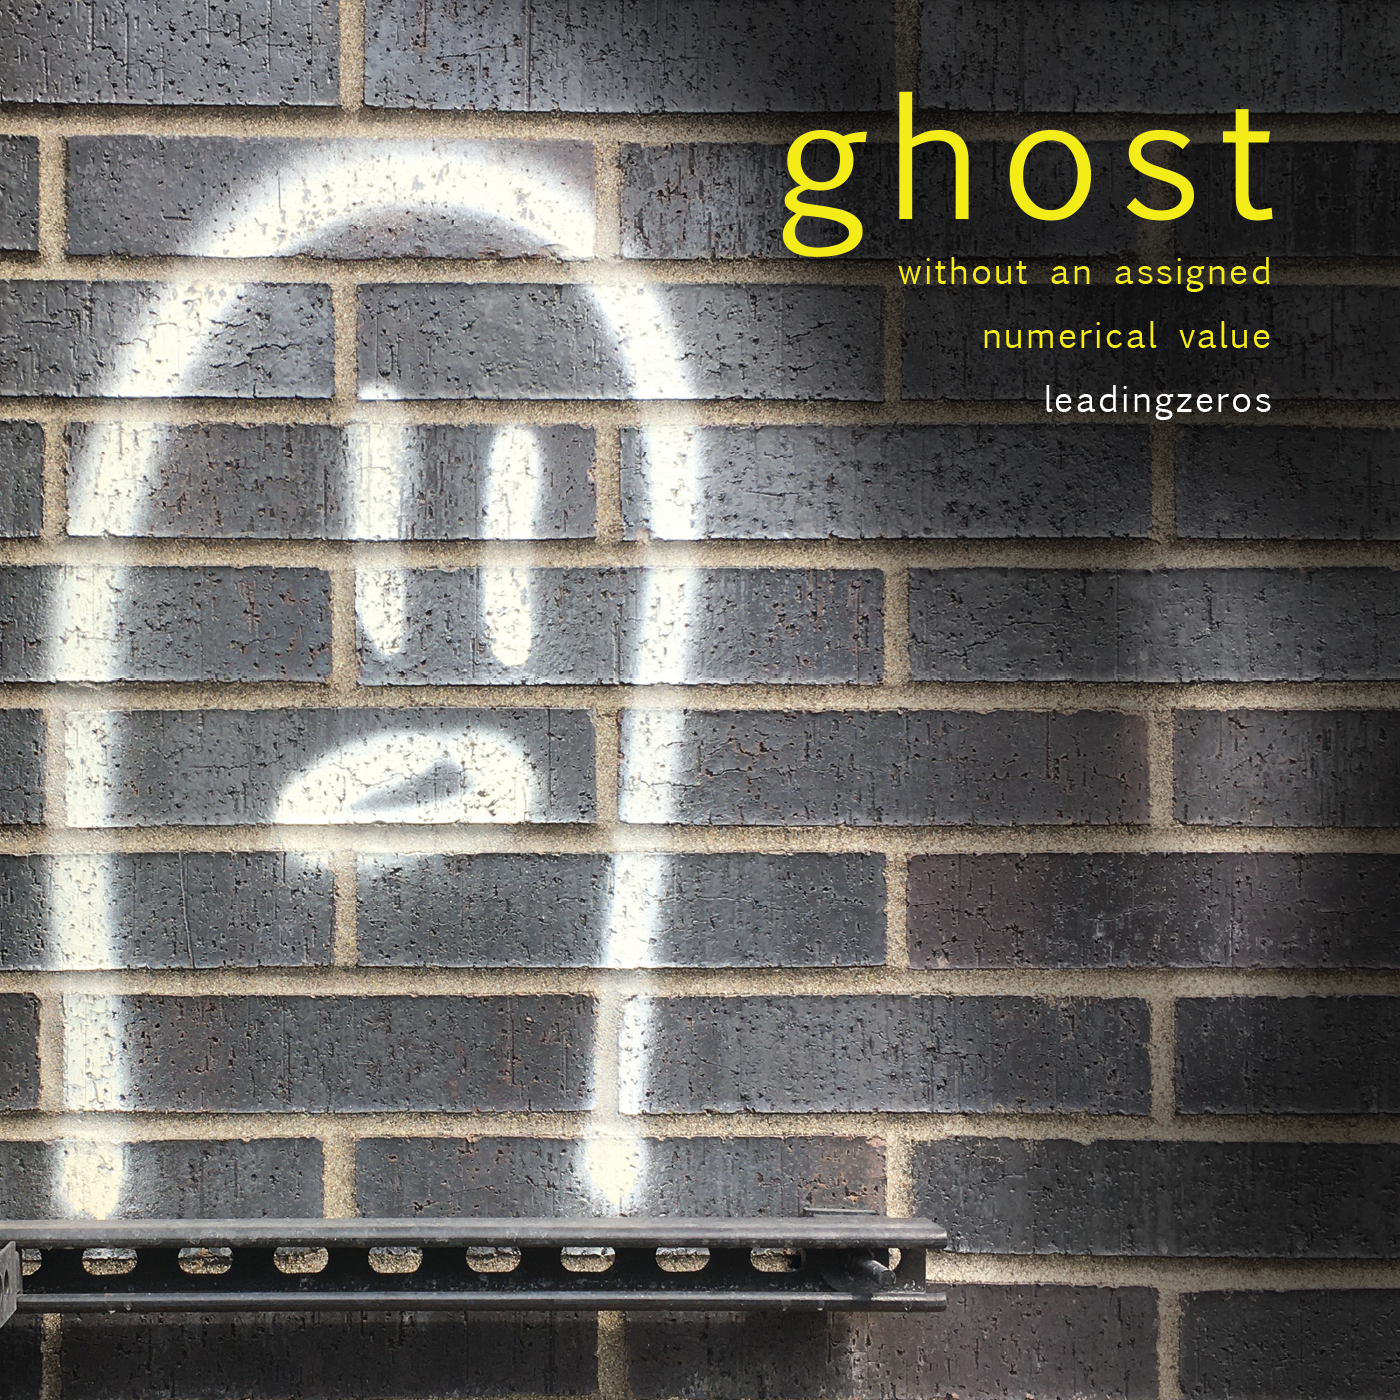 ghost without an assigned numerical value